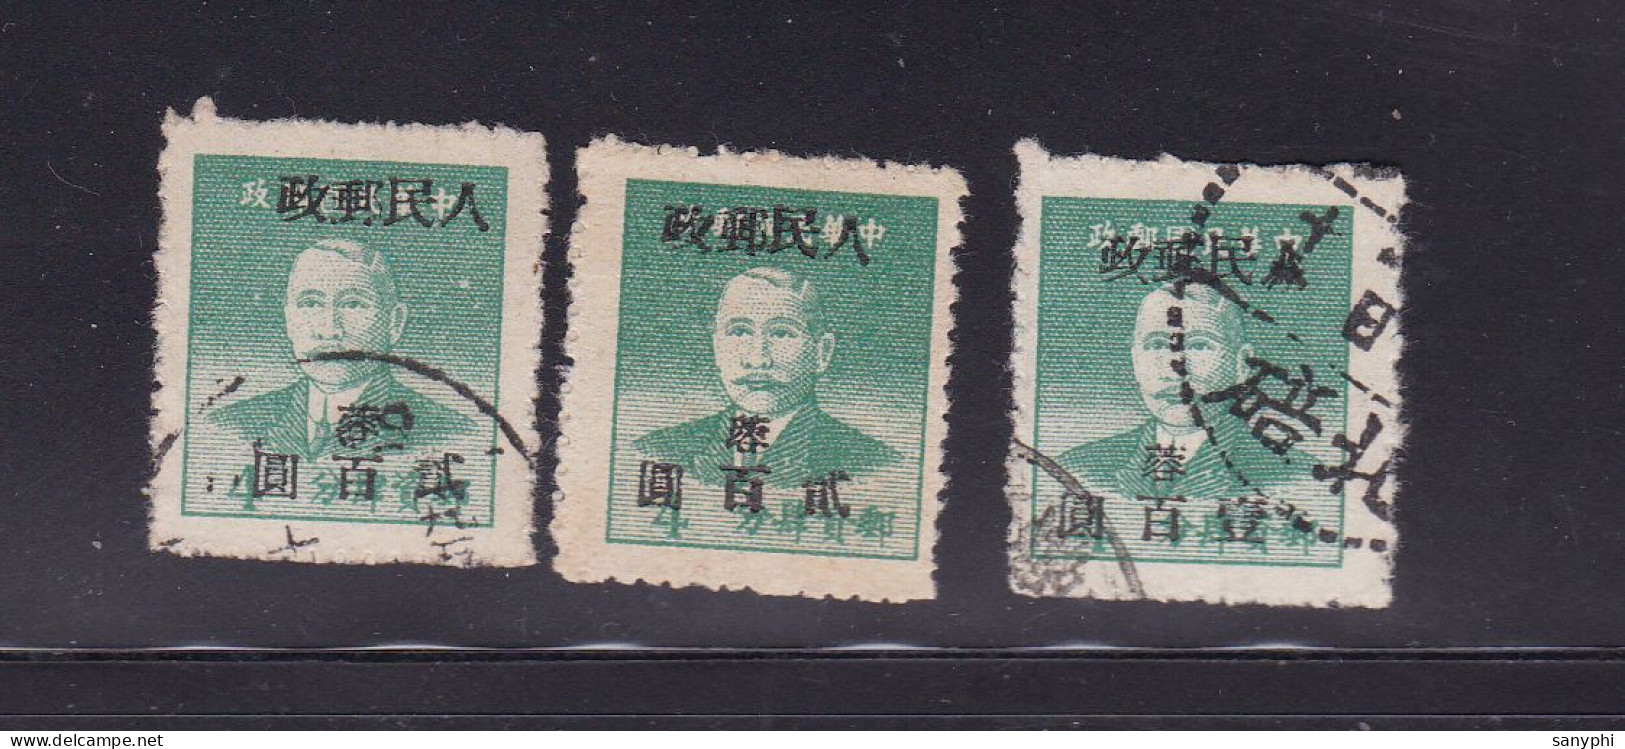 China Chine 1950 Gold Yuan Optd West Sichuan People's Posts 3 Used Stamps - Chine Orientale 1949-50